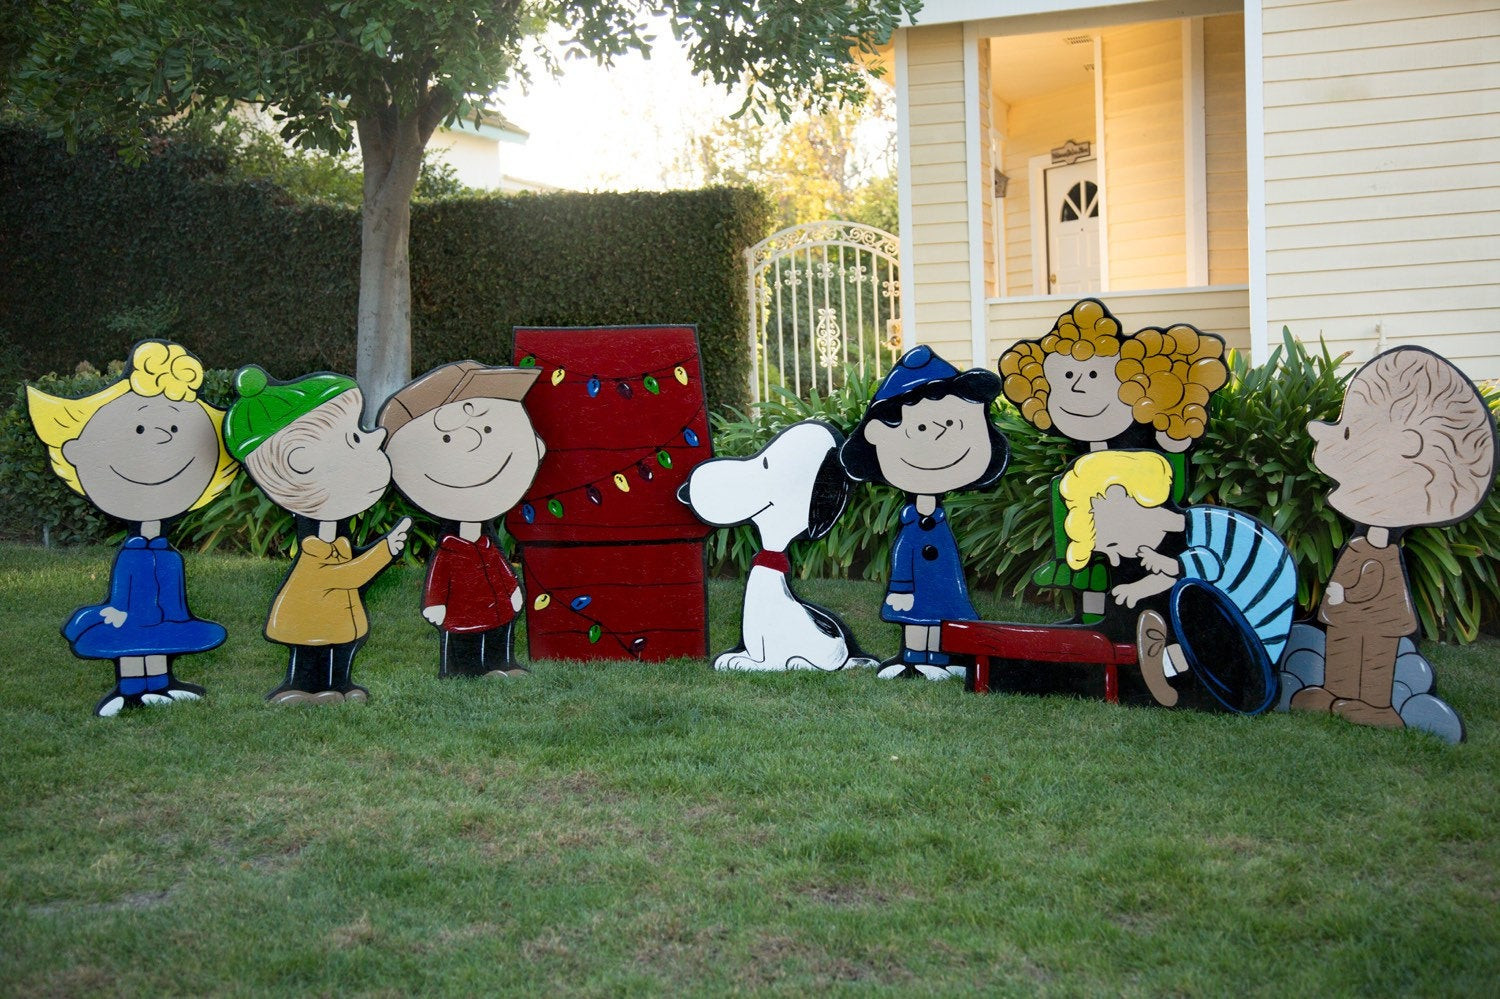 Peanut Outdoor Christmas Decorations
 Charlie Brown Christmas Lawn Decorations